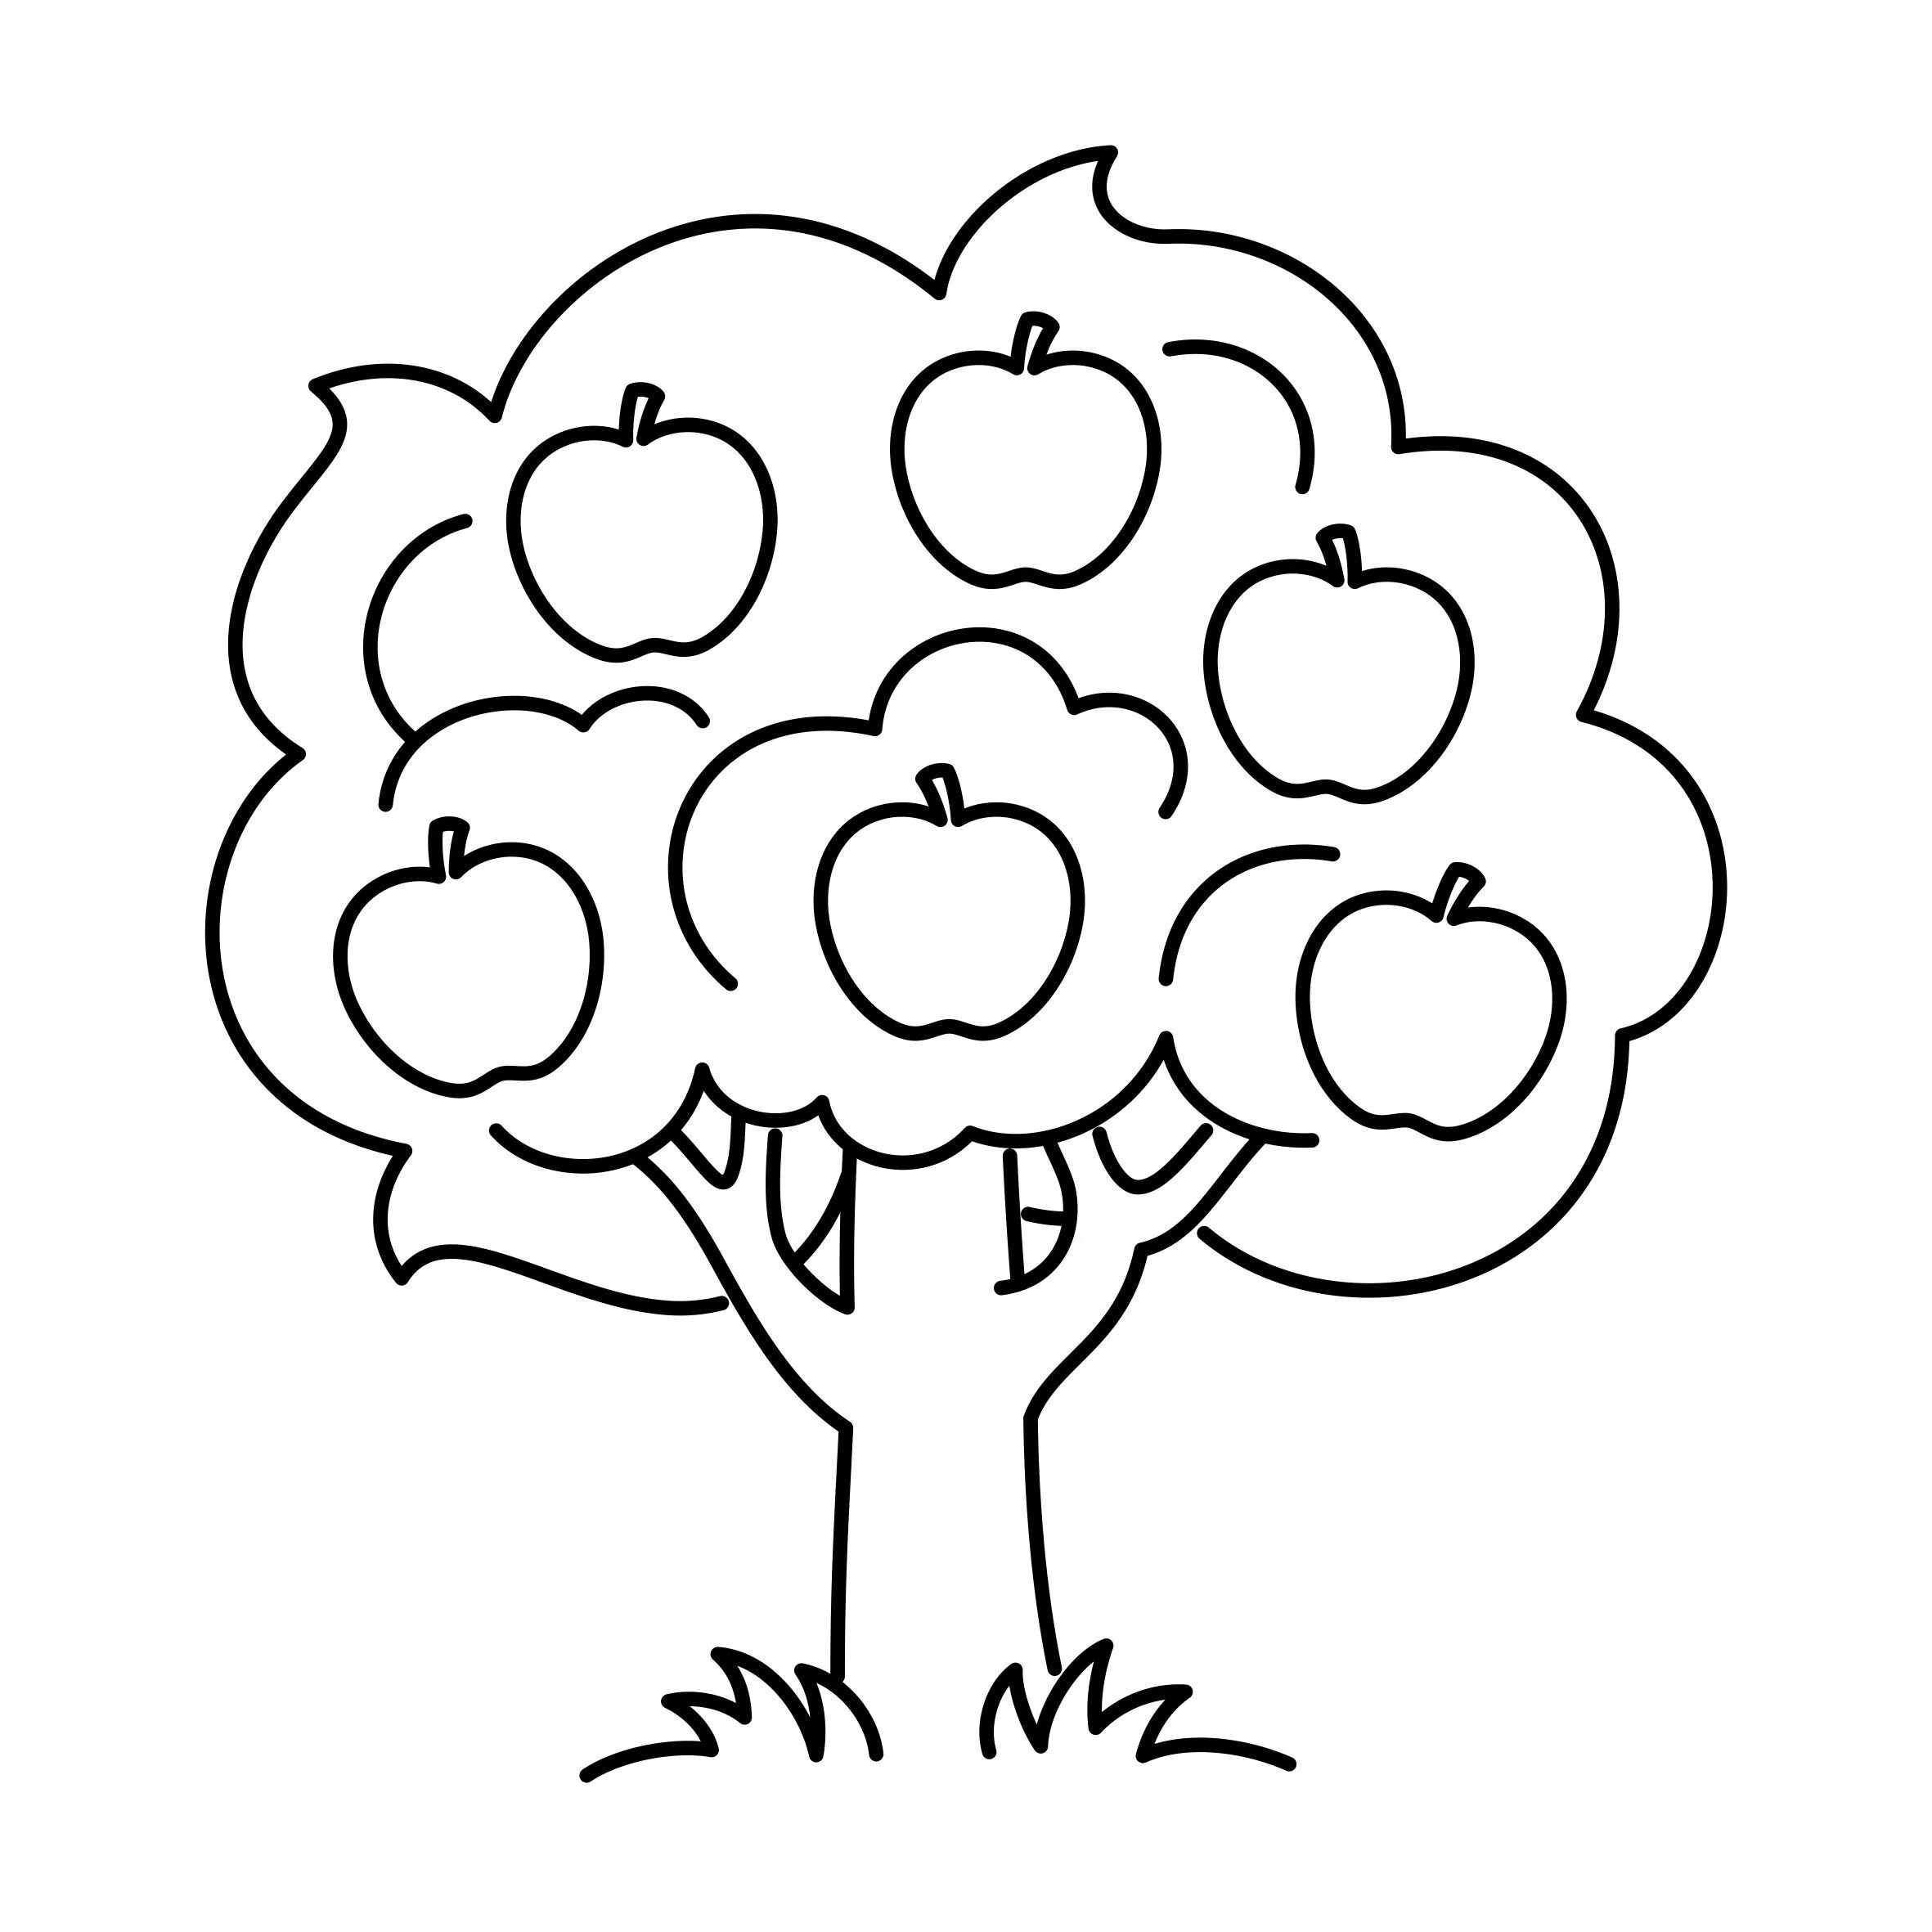 Coloring book excited apple trees for kids